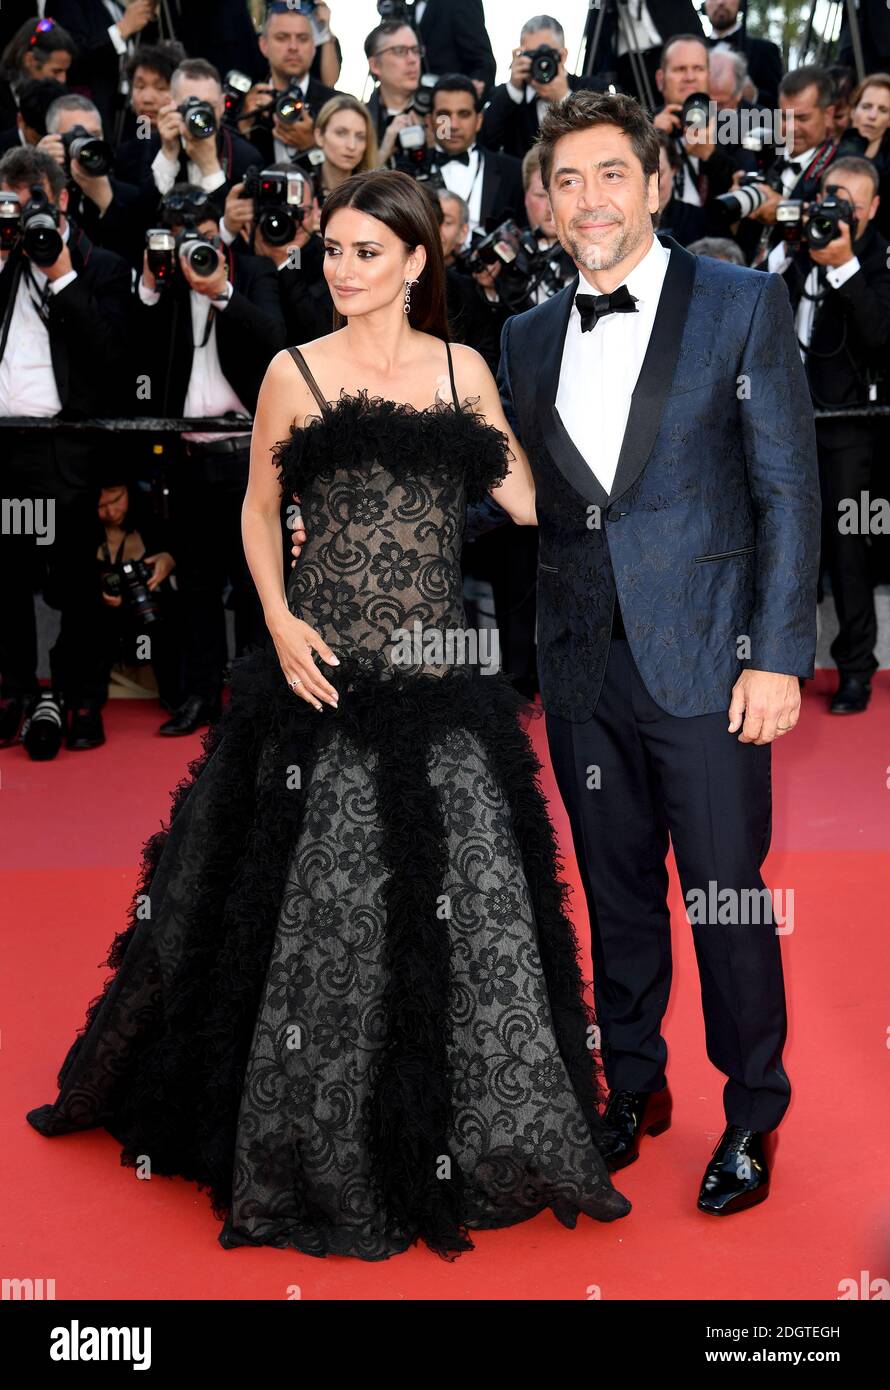 Penelope Cruz (left) and Javier Bardem (right) attending the Everybody Knows premiere during the 71st Cannes Film Festival Stock Photo